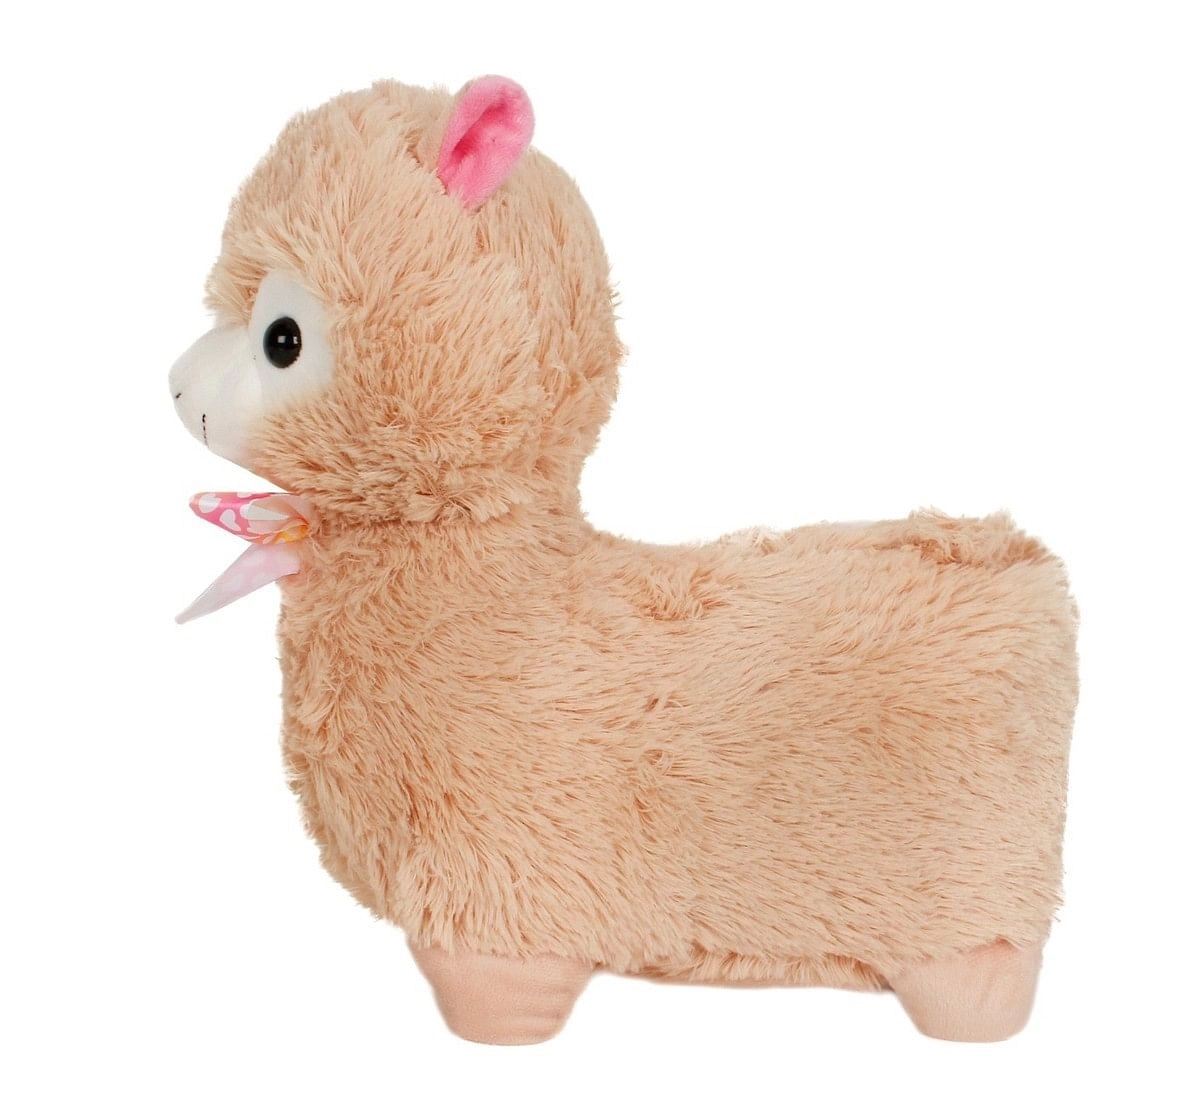 Fuzzbuzz Llama Stuffed Plush Toy - Brown - 33Cm Quirky Soft Toys for Kids age 0M+ - 33 Cm (Brown)